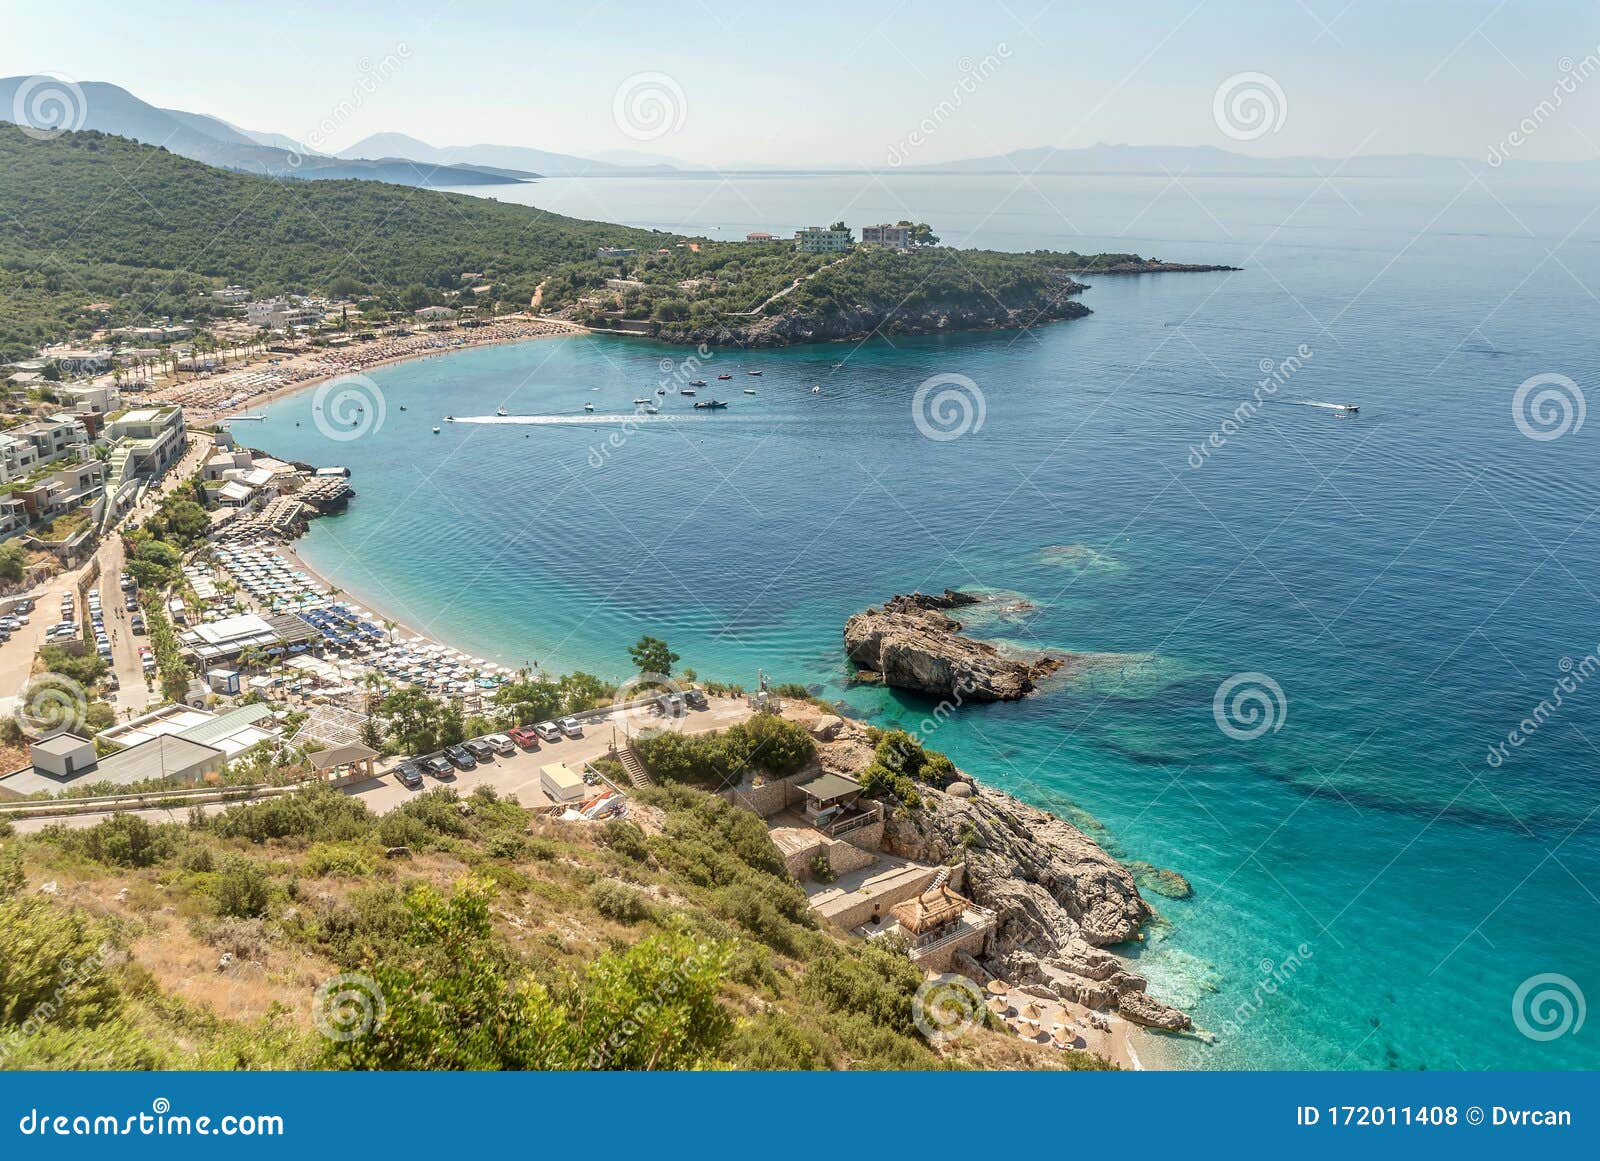 view of the beutiful sand beach jale in southern albania